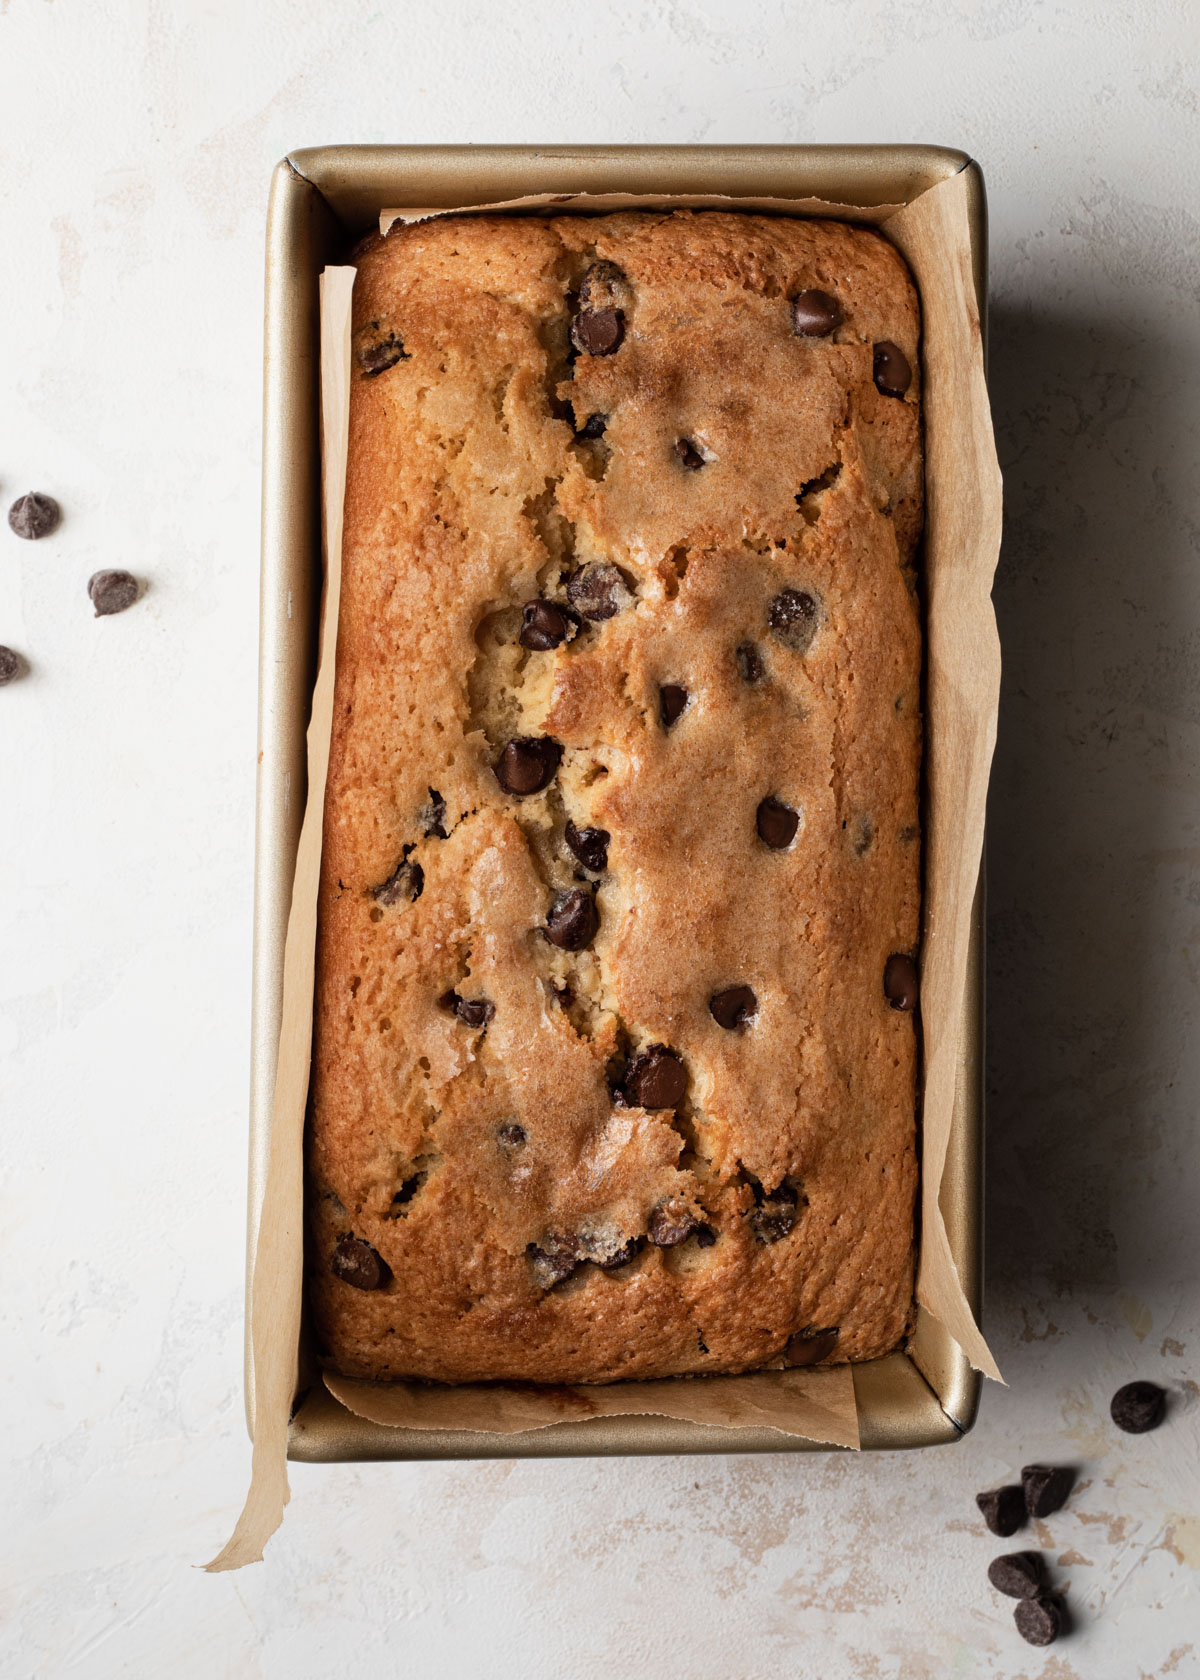 Pound cake baked in a loaf pan with chocolate chips